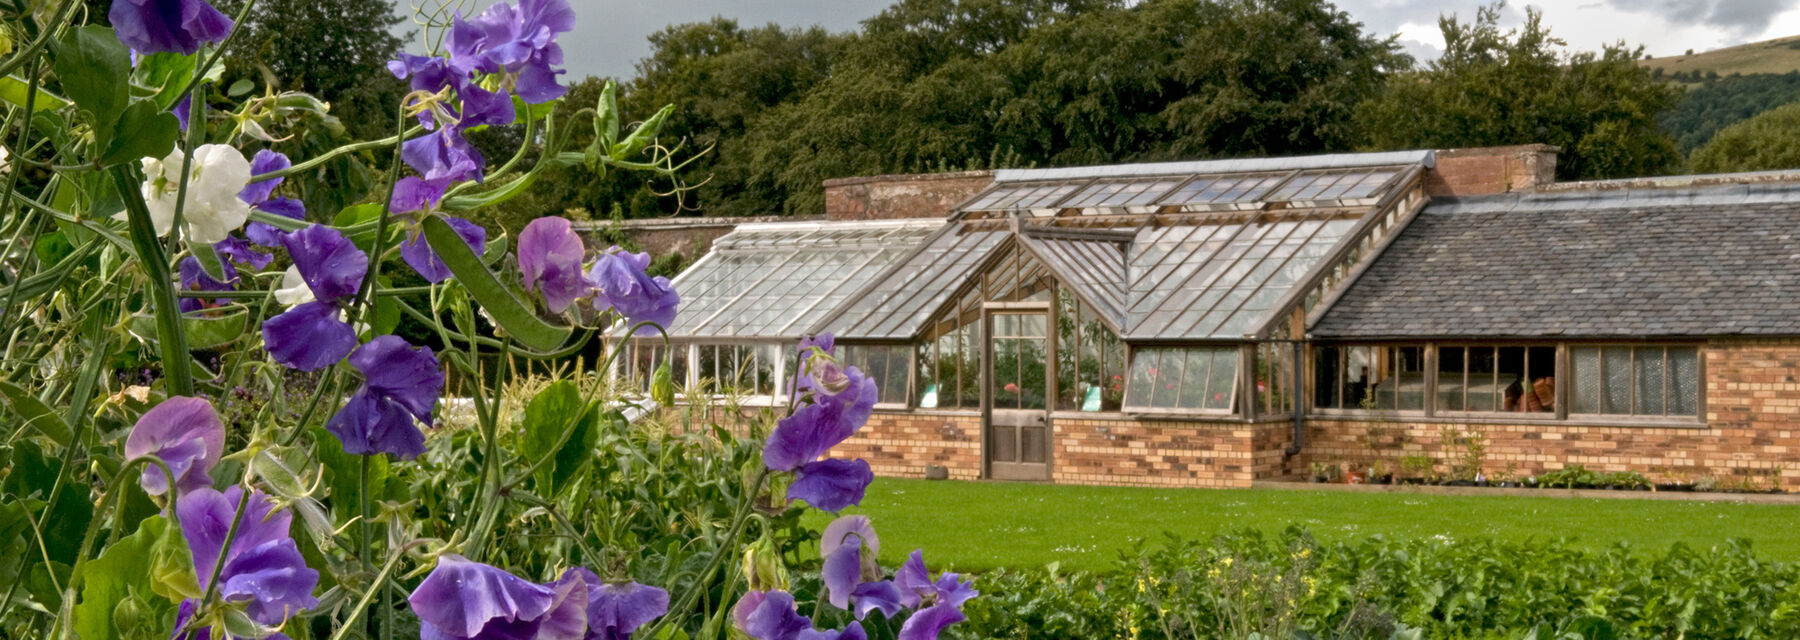 Purple Sweetpeas grow in the foreground at Harmony Garden, with the glasshouse and other garden buildings seen in the background.